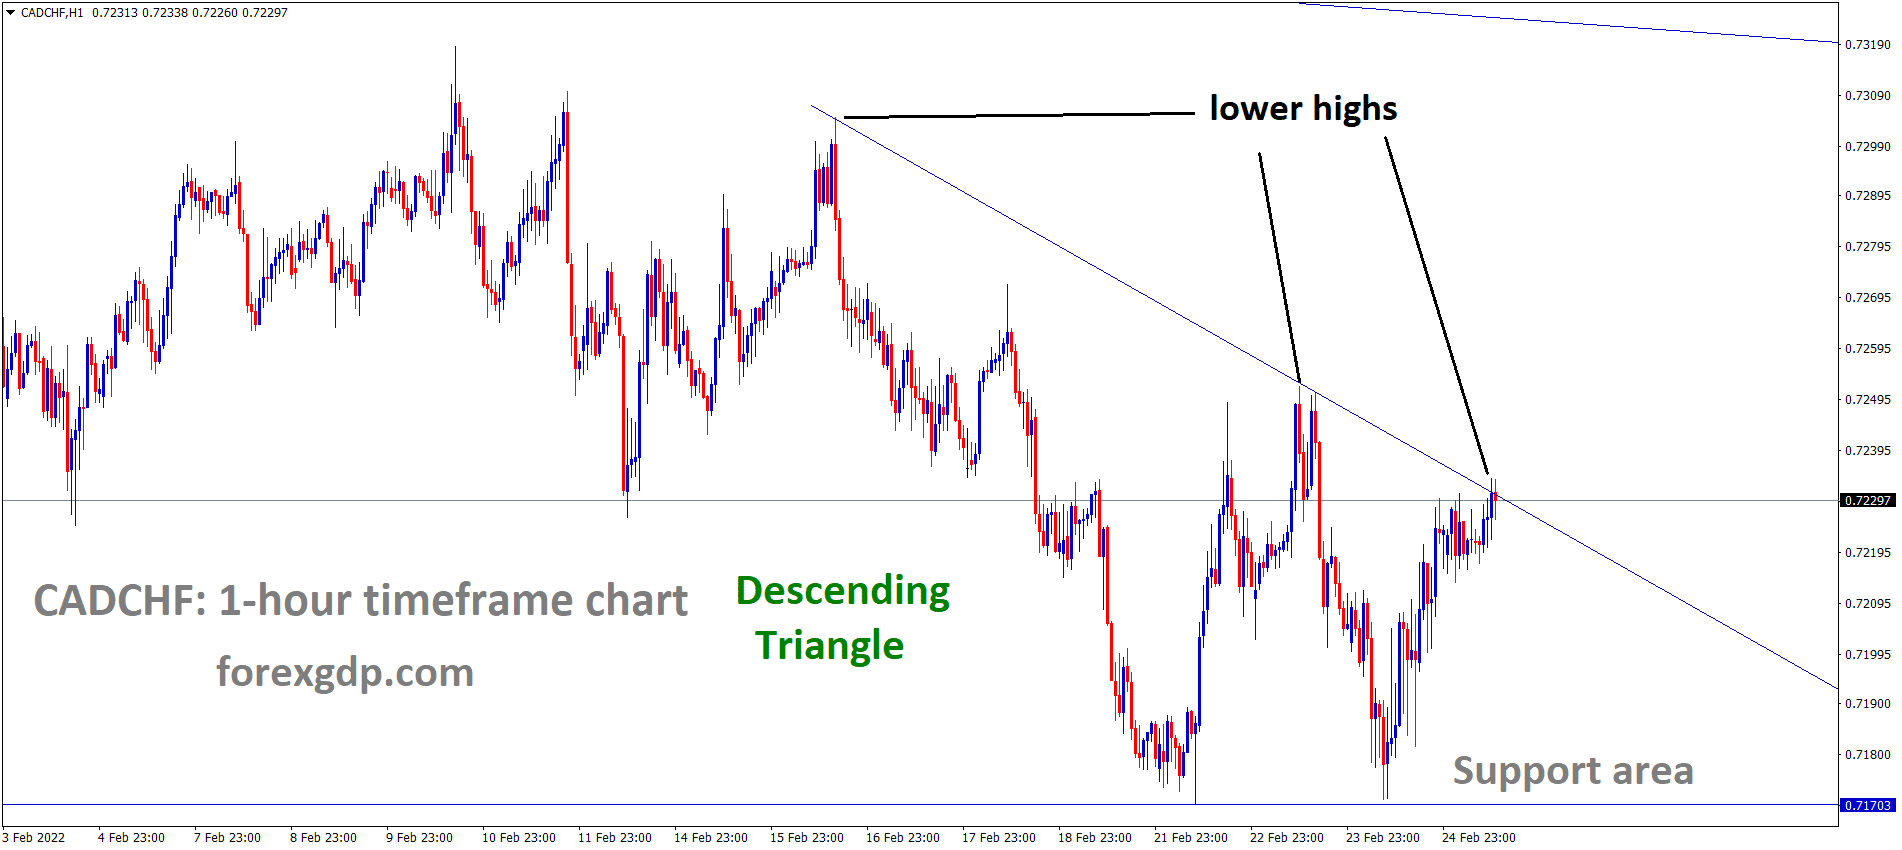 CADCHF is moving in the Descending triangle pattern and the market has reached the lower high area of the Triangle pattern.